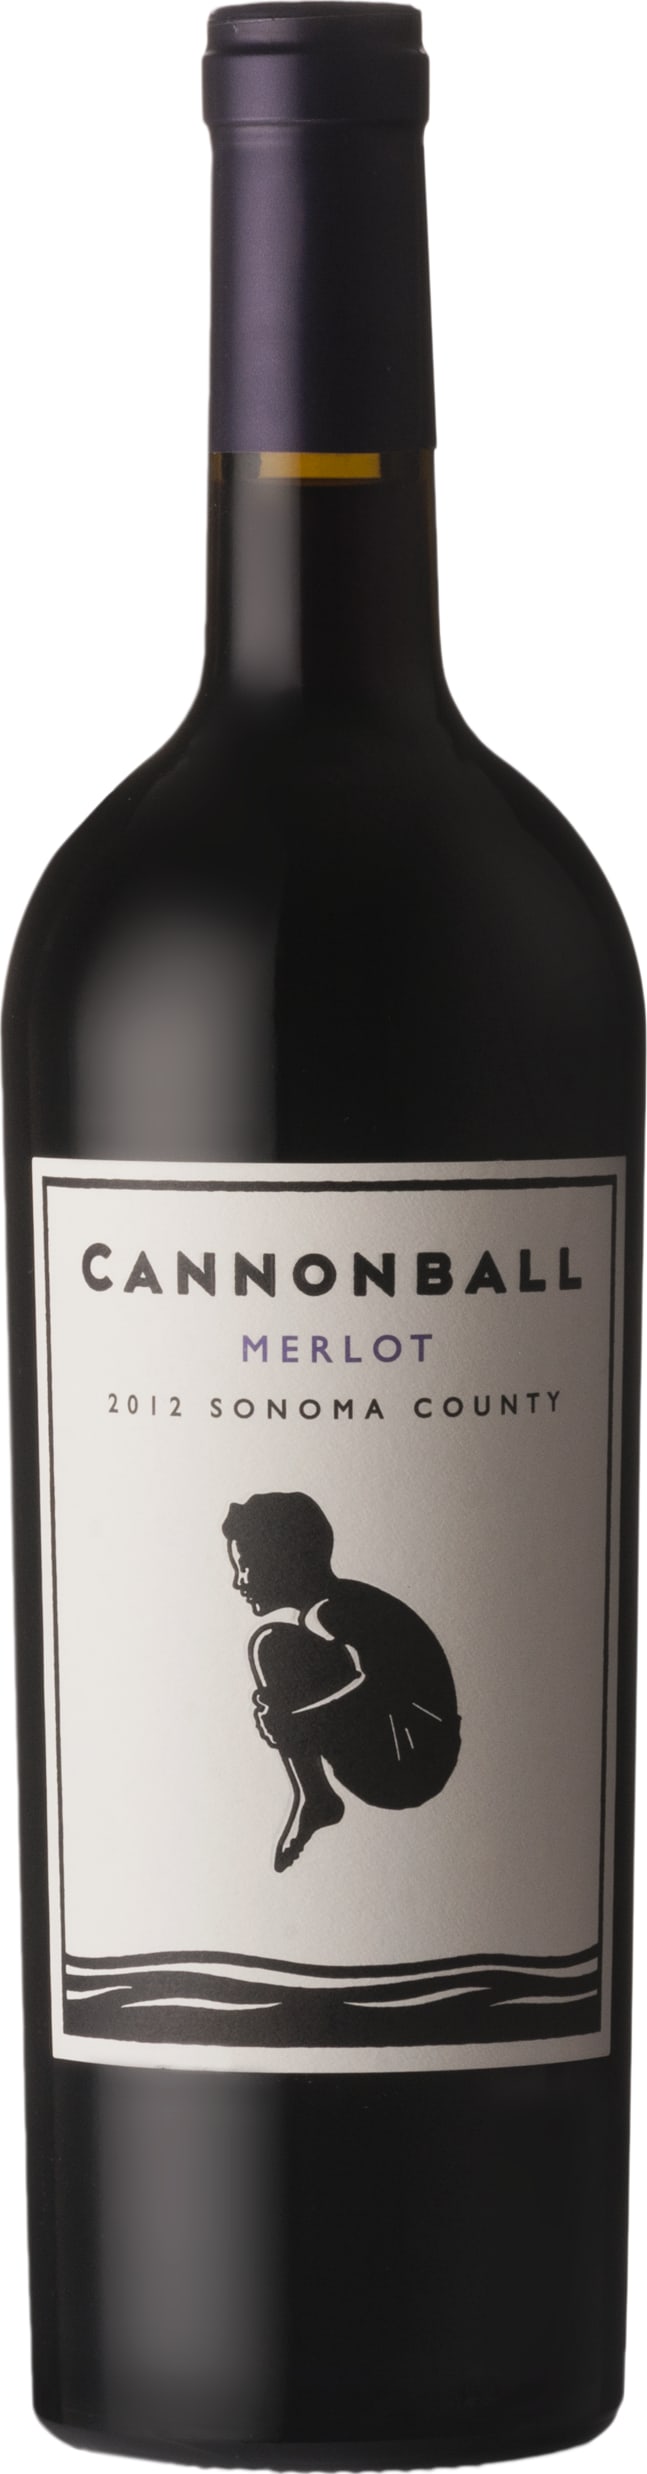 Cannonball Merlot 2020 75cl - Buy Cannonball Wines from GREAT WINES DIRECT wine shop